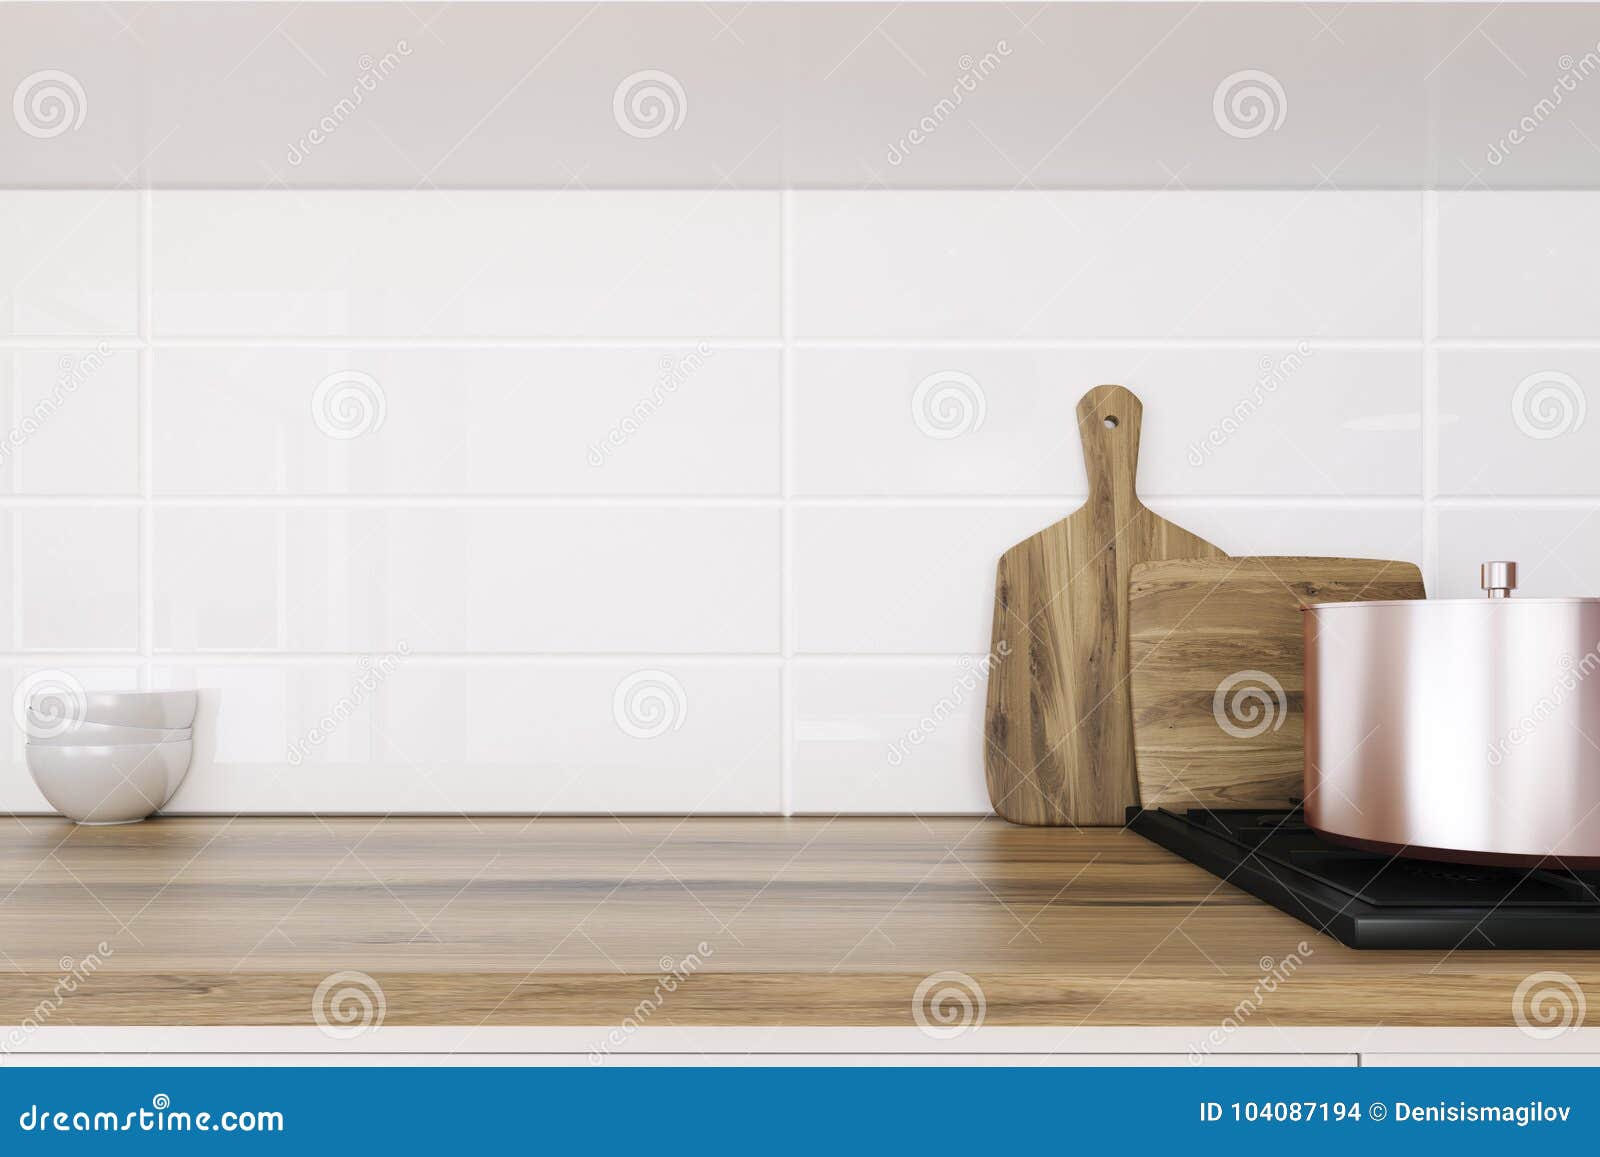 Wooden Kitchen Countertop Close Up Stock Illustration